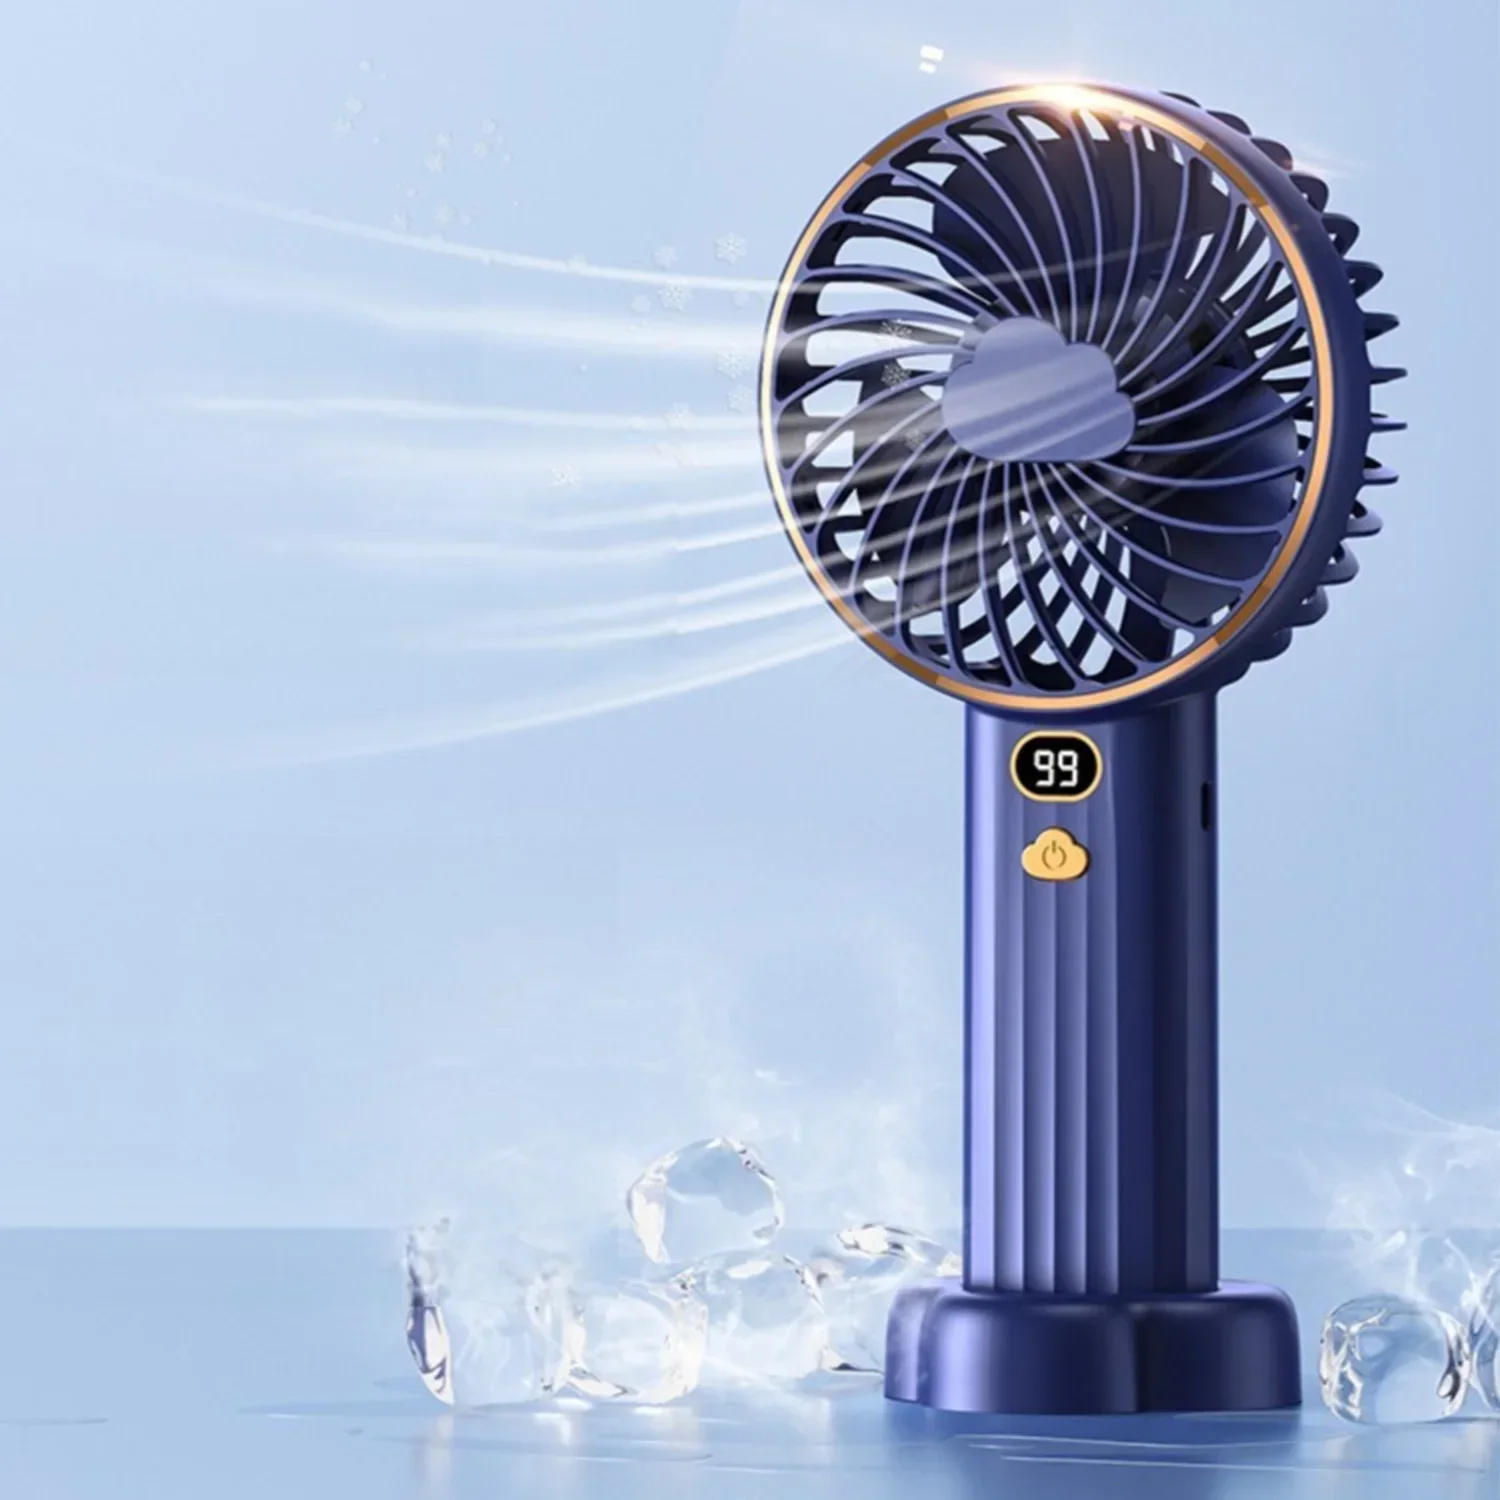 

Electric Fans,Handheld USB Rechargeable,5 Speeds Setting Air Cooler Wind,10000mAh Battery Portable Fans for Bedroom,Office,Home